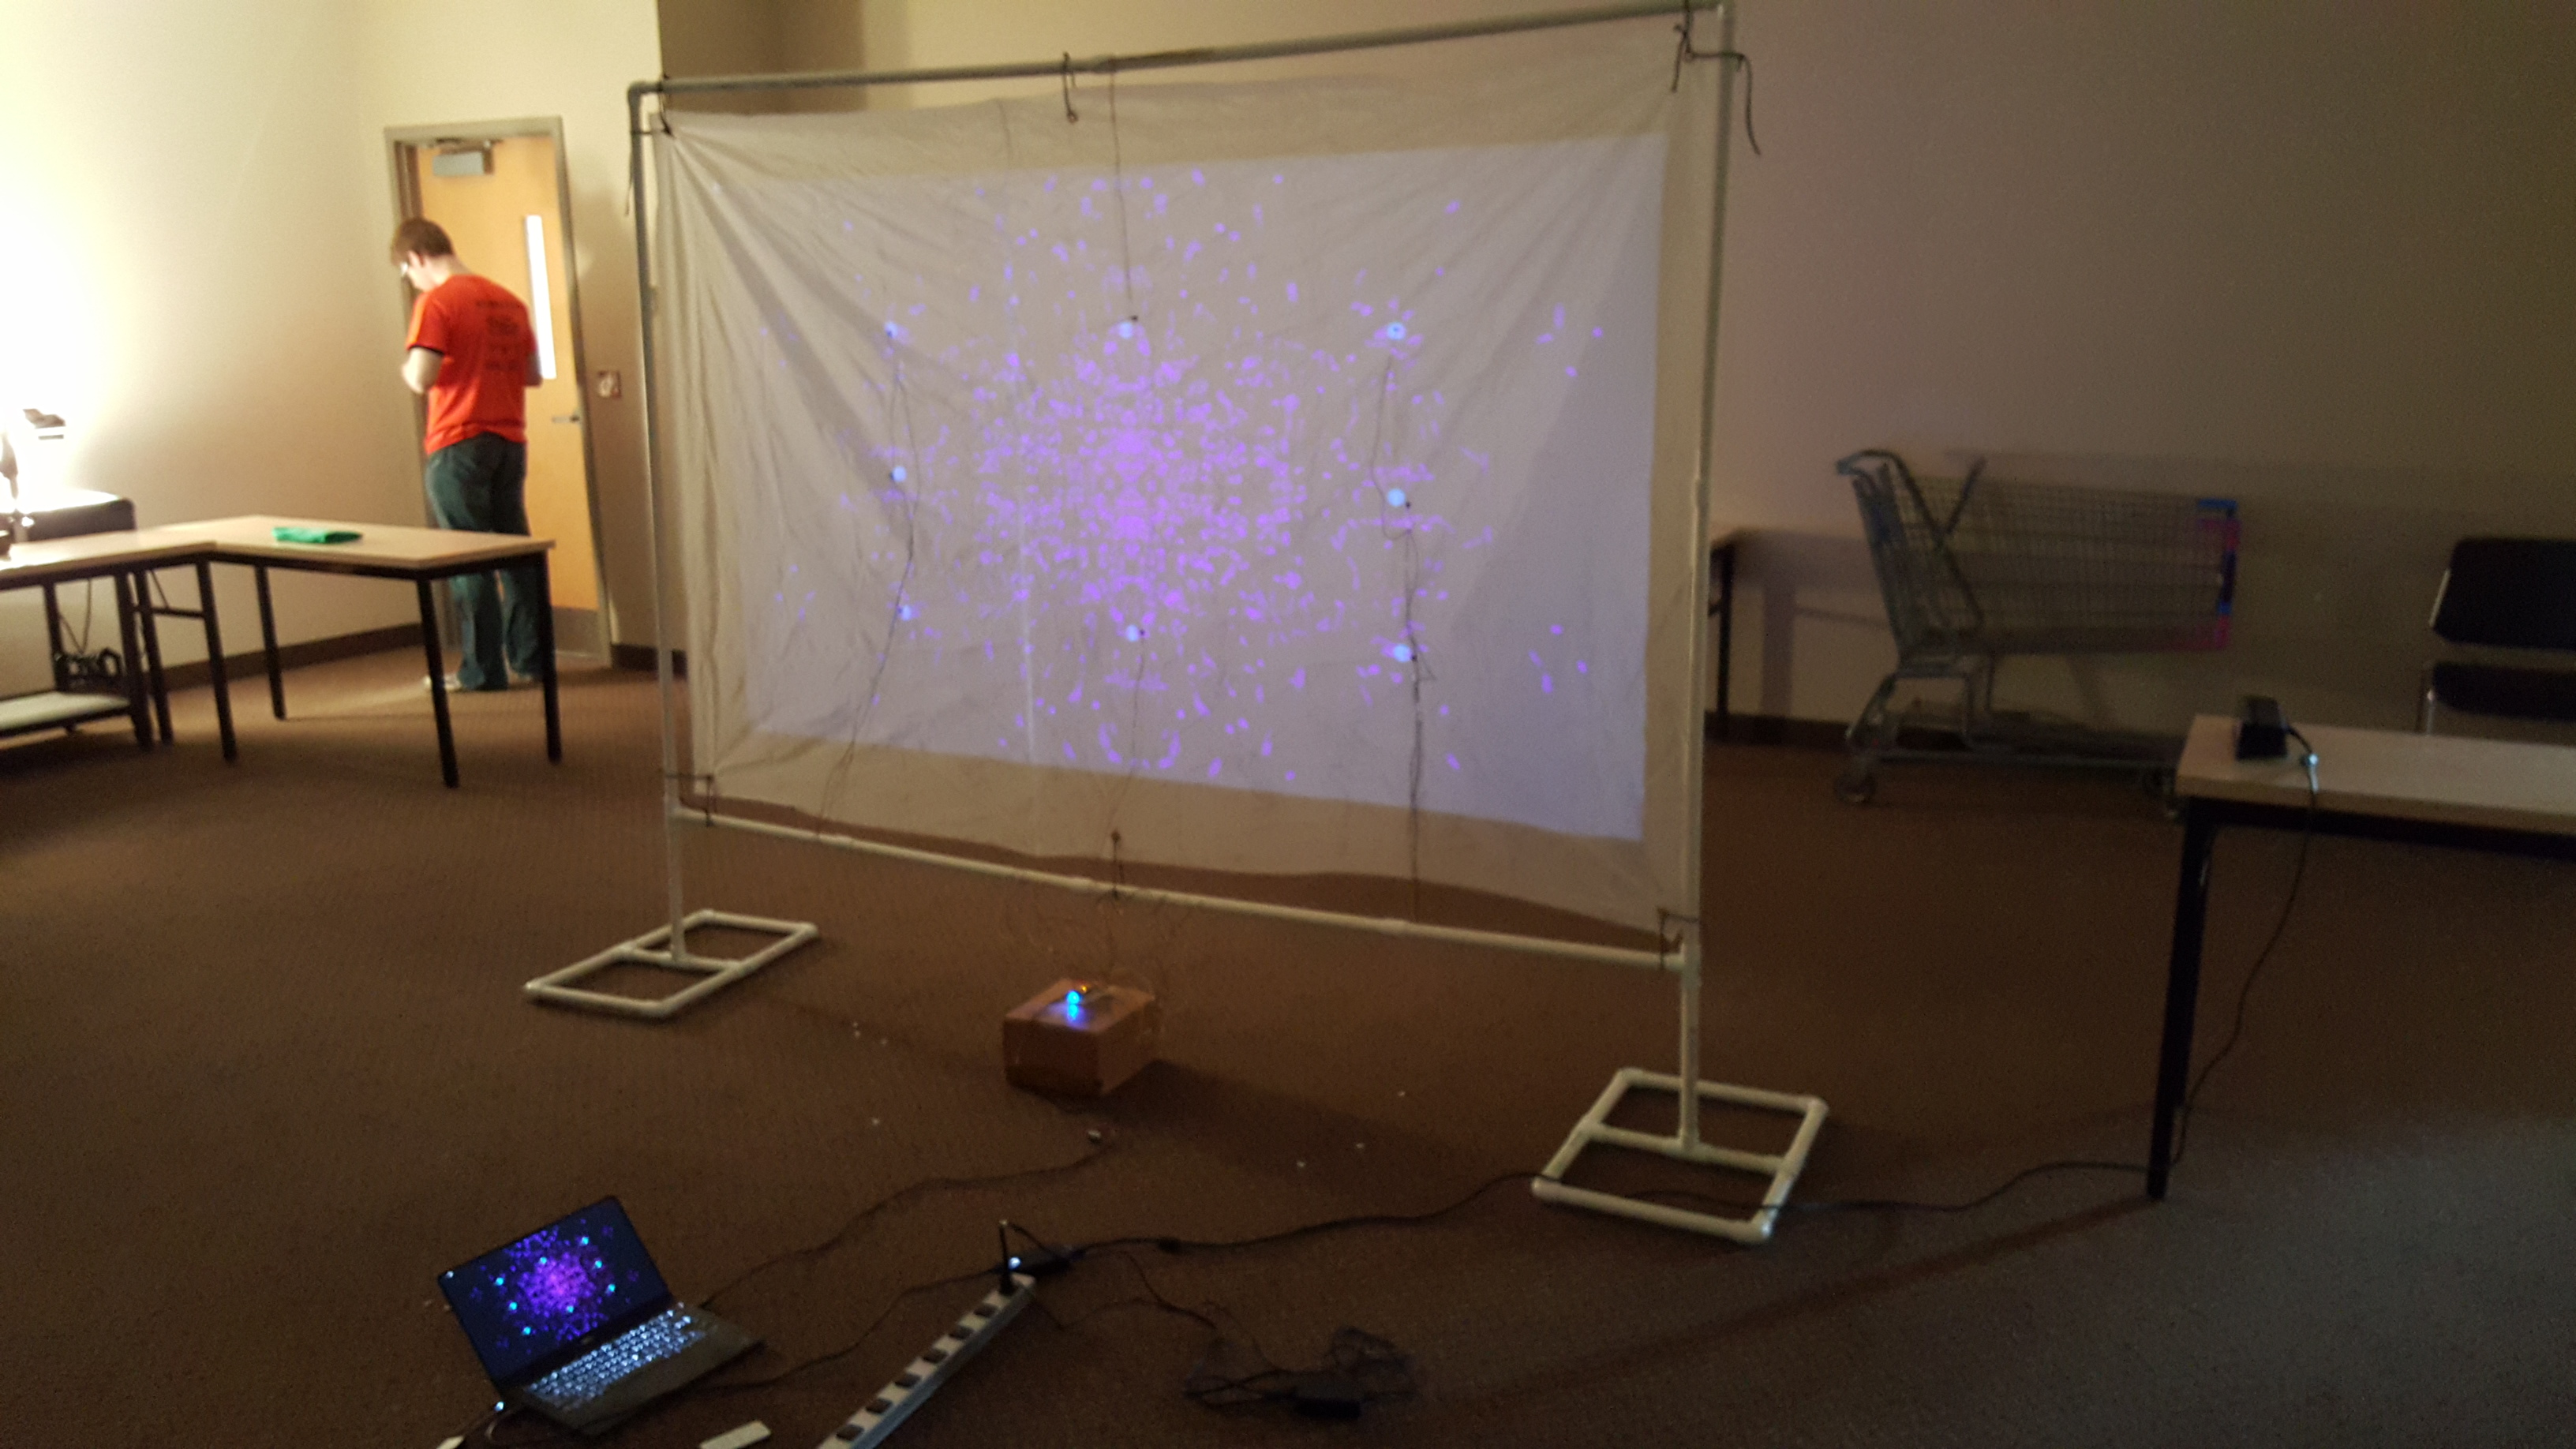 Back view of the rear projection display with the wiring